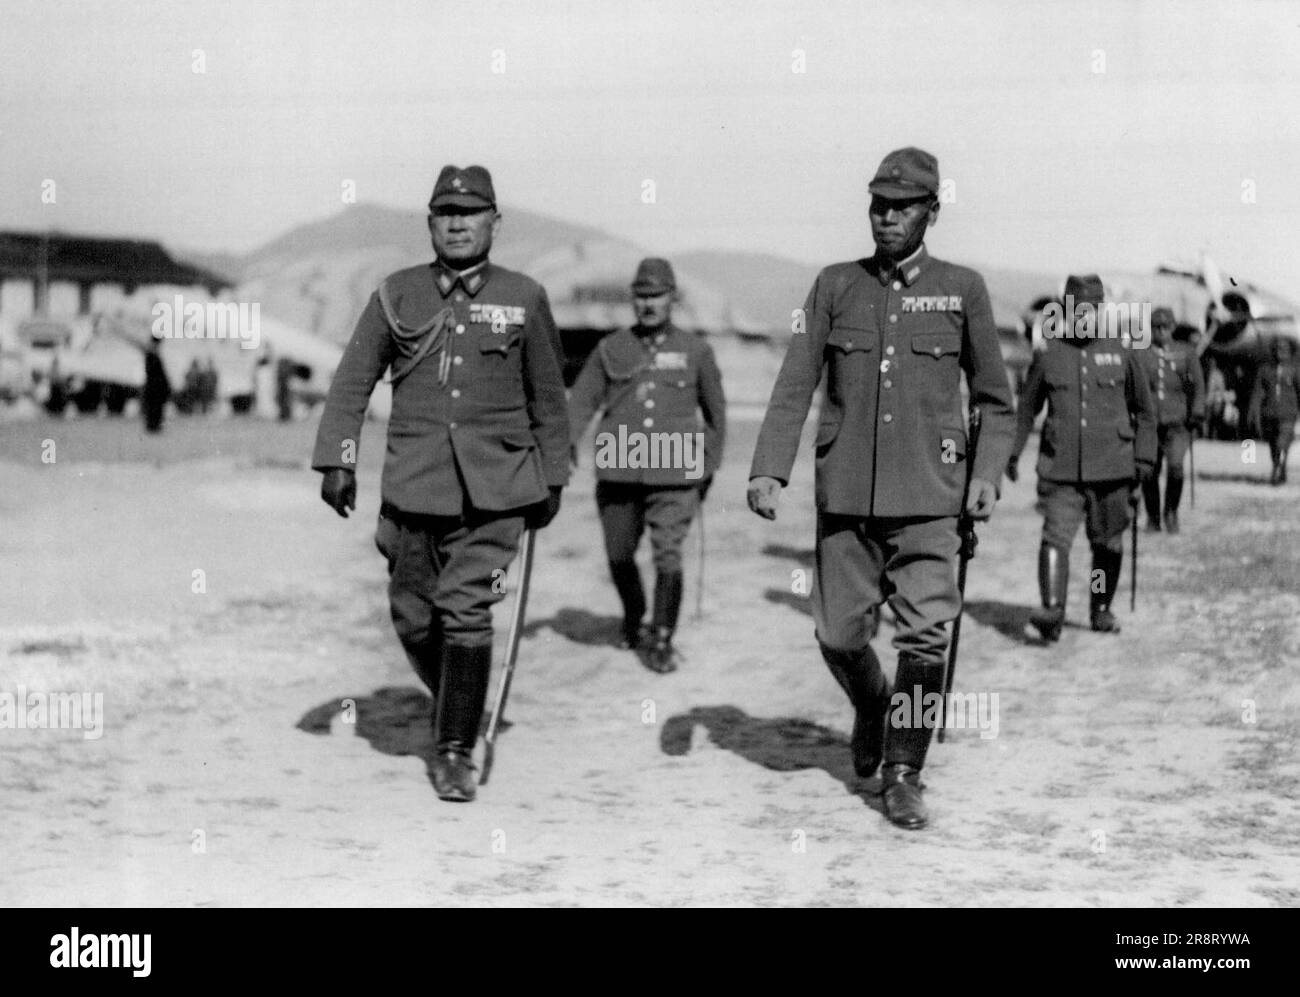 Tokyo... Sugiyama Returns from Naking.. General Gen. Sugiyama, chief of the Army Staff, who has been inspecting the battle fronts in China, during which he also conferred with General Toshizo Nishio, right. Supreme commander of the Japanese, forces in China ***** to Tokyo today. November 6, 1940. (Photo by The Domei News Photos Service). Stock Photo